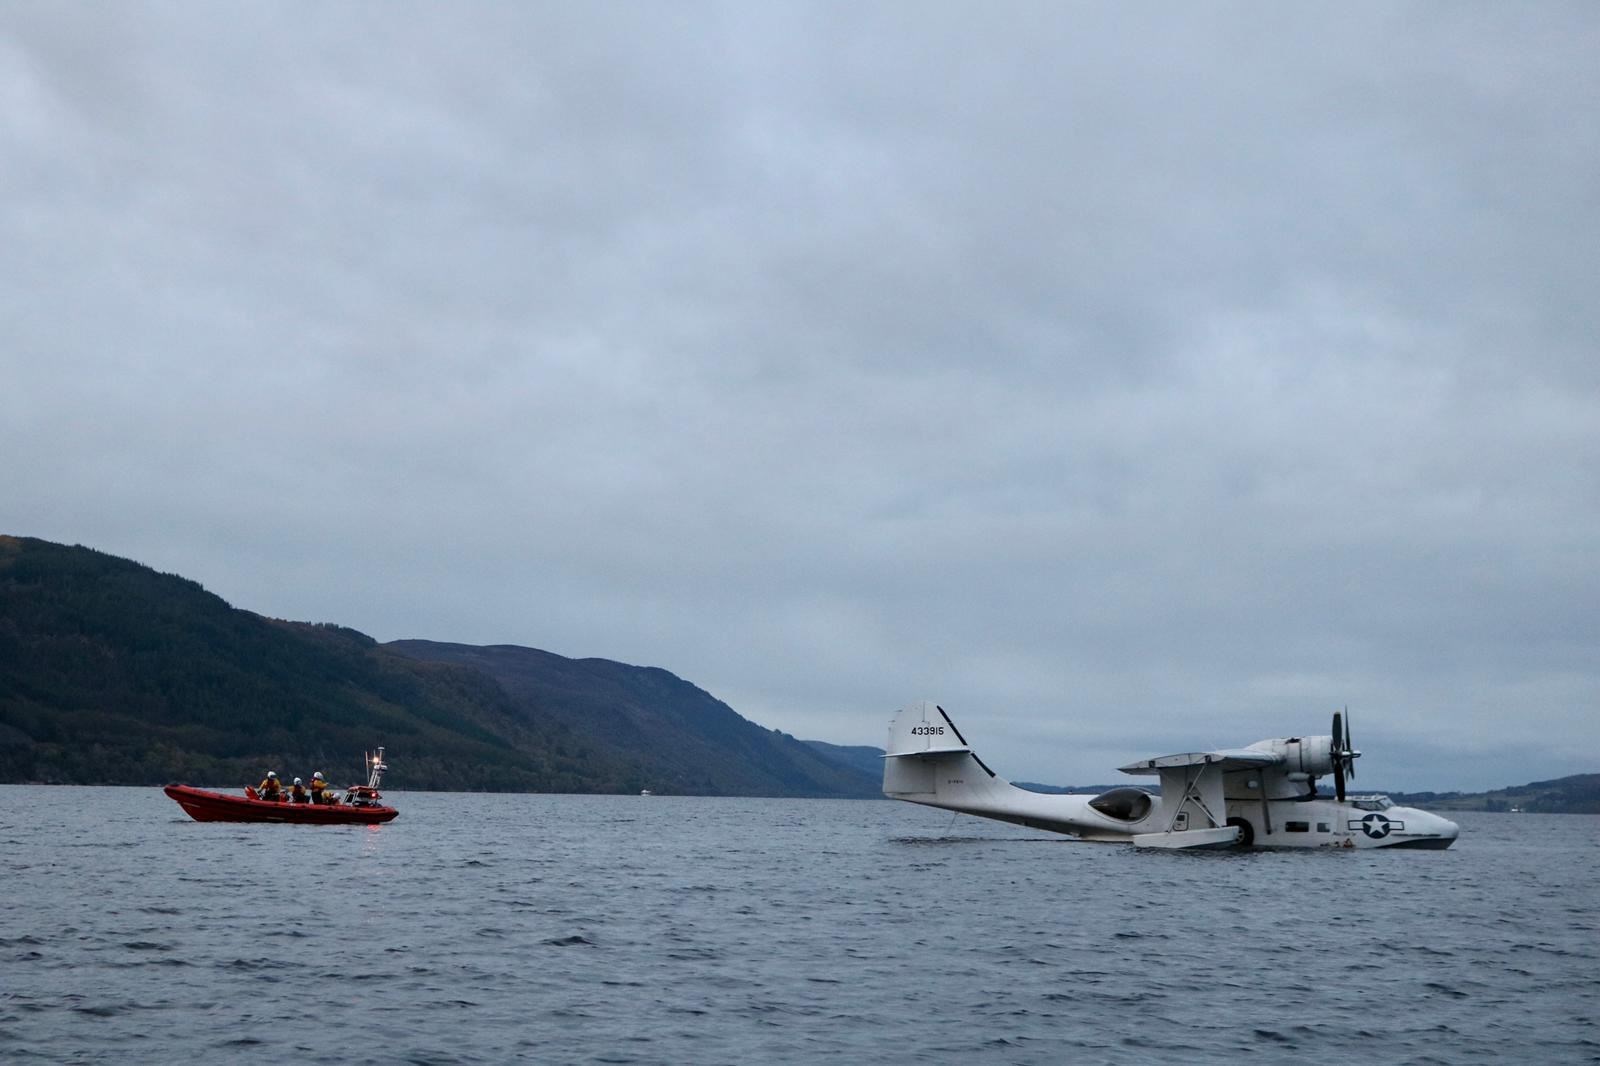 The Loch Ness RNLI crew come to the aid of the stranded seaplane and its pilot and three passengers (photo: Kirsten Dawn Ferguson)